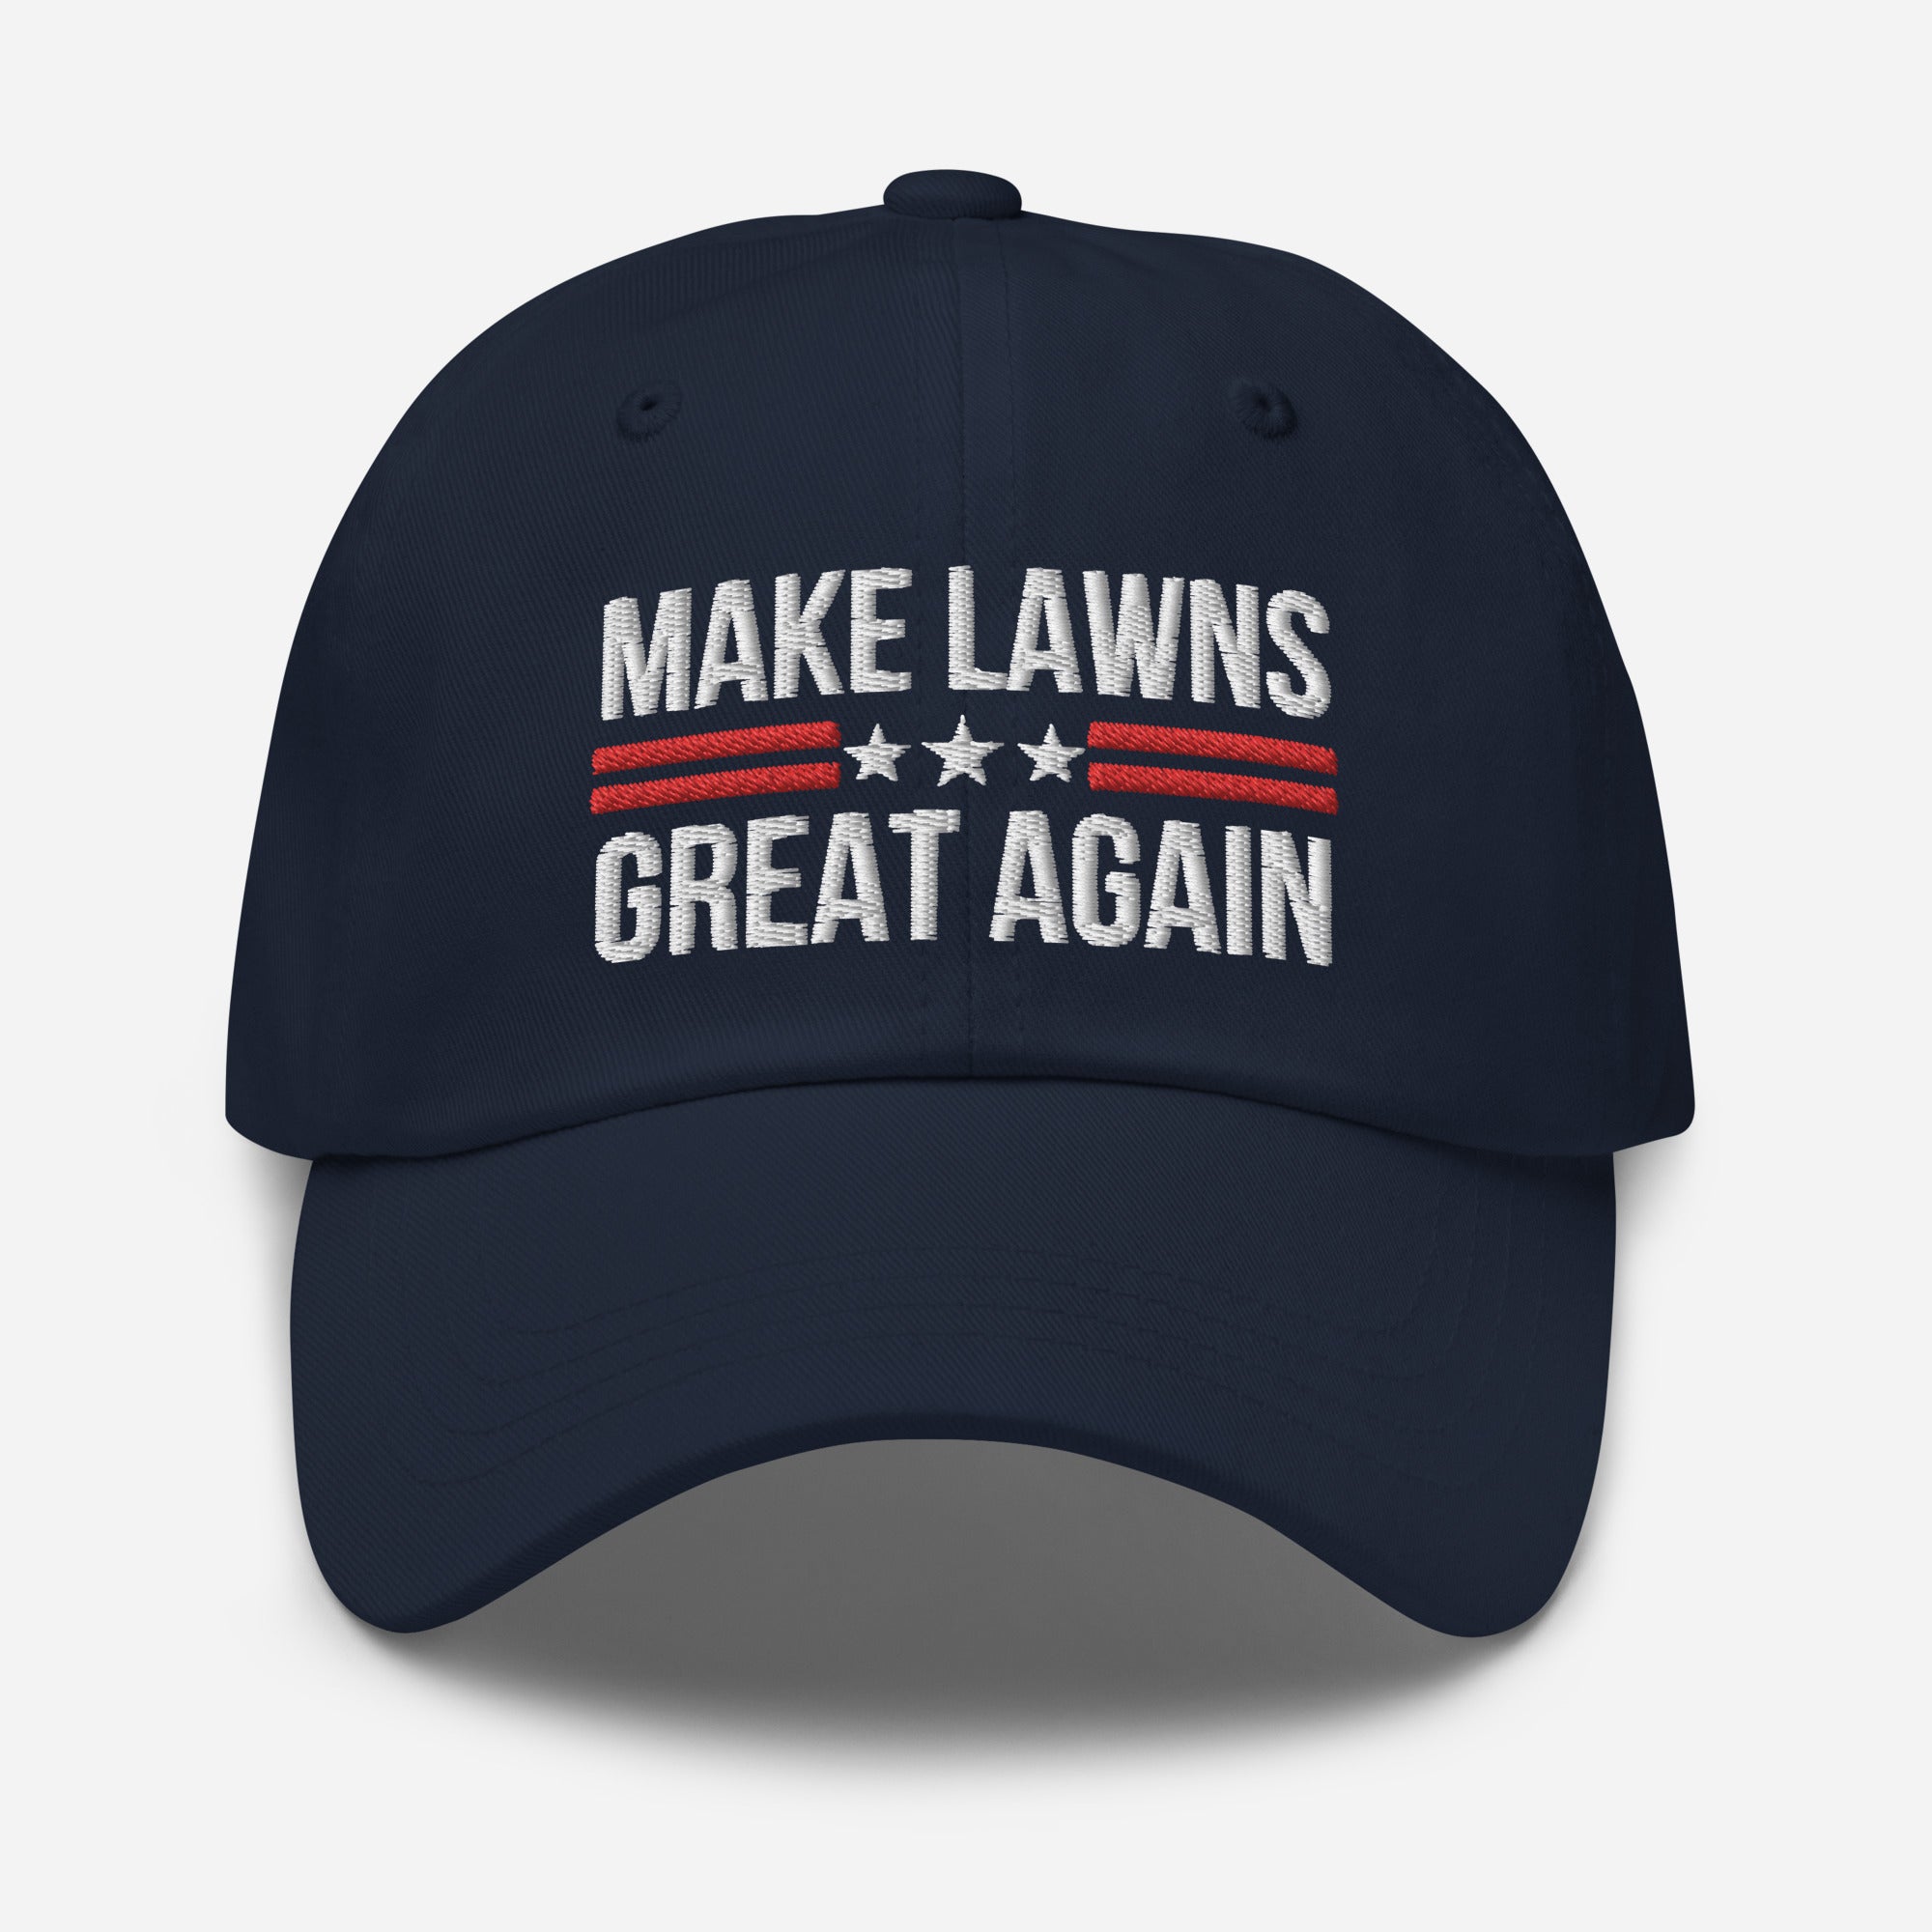 Make Lawns Great Again Hat, Funny Dad Gift, Lawn Mower, Fathers Day Gifts, Fathers Day Cap, Funny Gardening Hat, Mowing Dad Hat - Madeinsea©